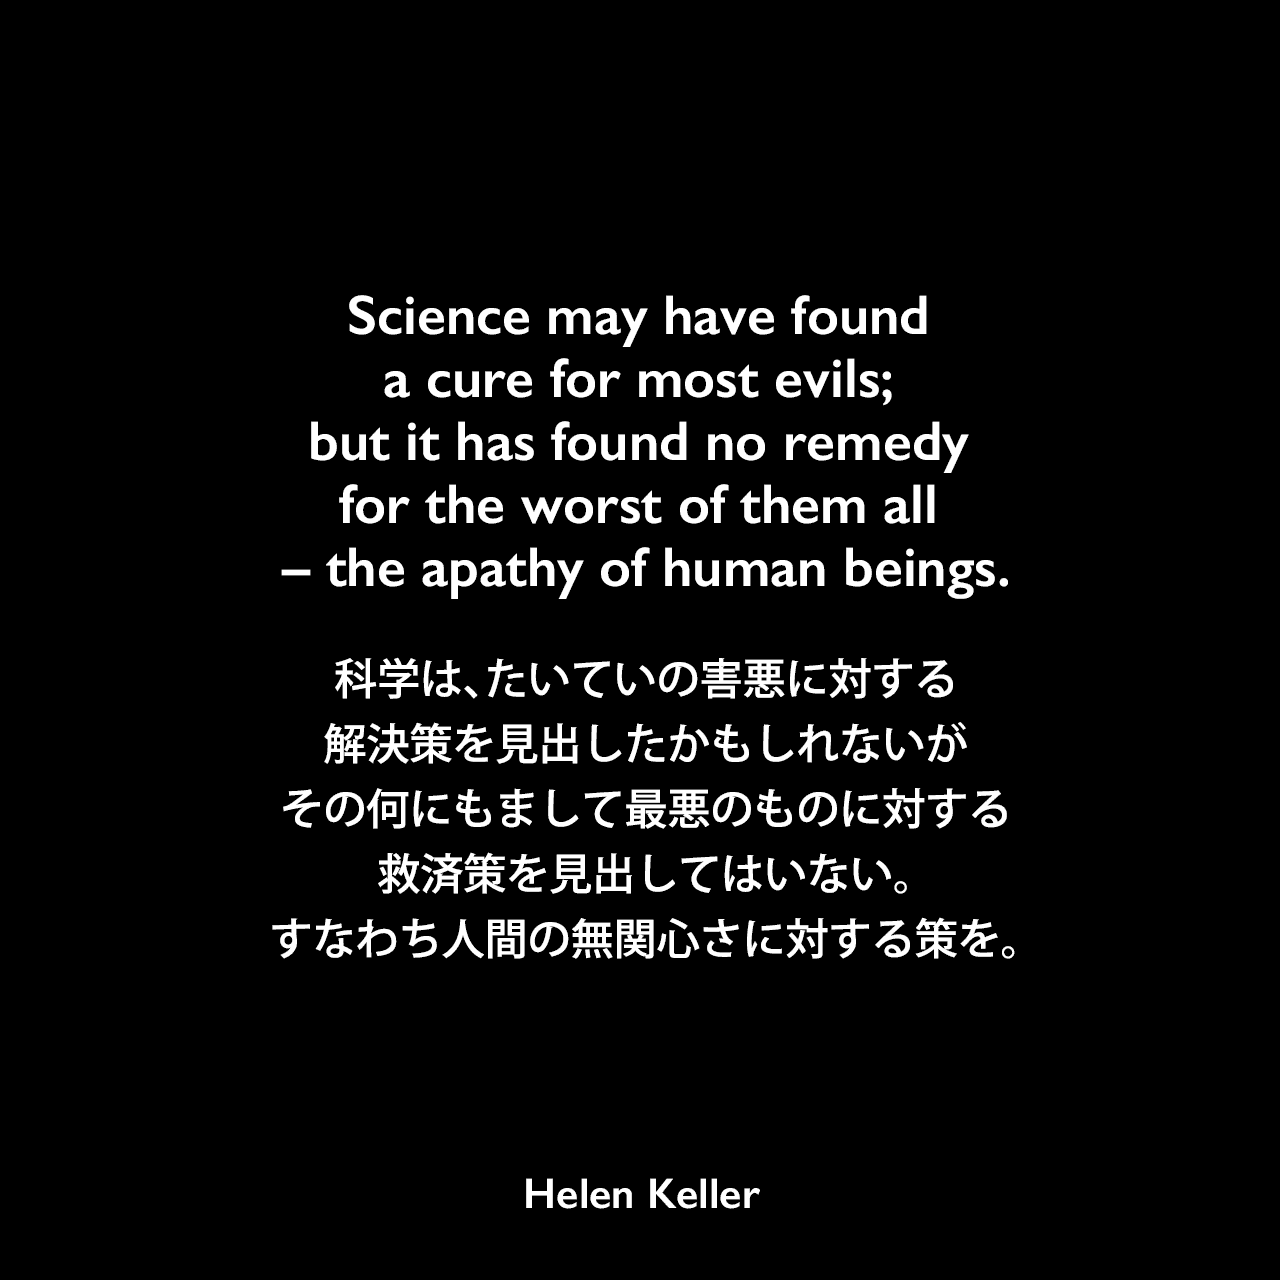 Science may have found a cure for most evils; but it has found no remedy for the worst of them all – the apathy of human beings.科学は、たいていの害悪に対する解決策を見出したかもしれないが、その何にもまして最悪のものに対する救済策を見出してはいない。すなわち人間の無関心さに対する策を。- ヘレン・ケラーの本「My Religion / Light in My Darkness」よりHelen Keller